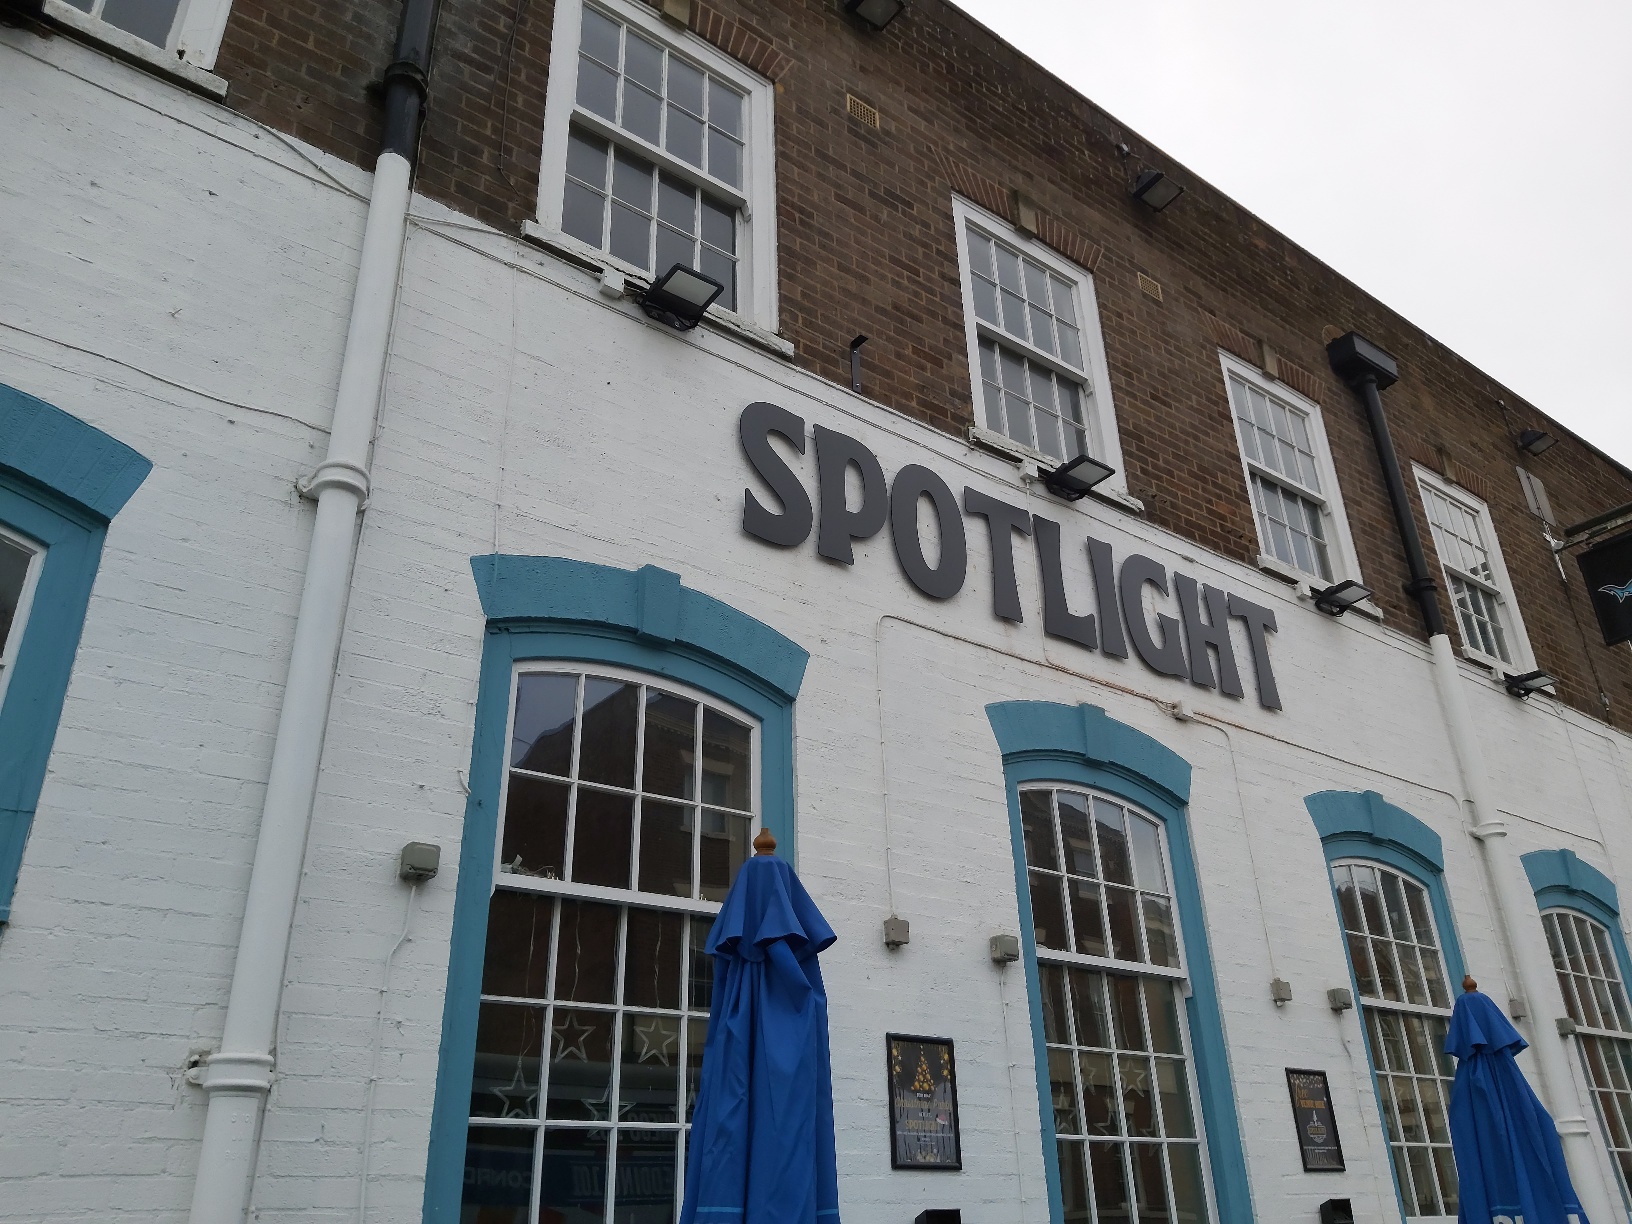 Spotlight External Signage by Business 101 in Hull